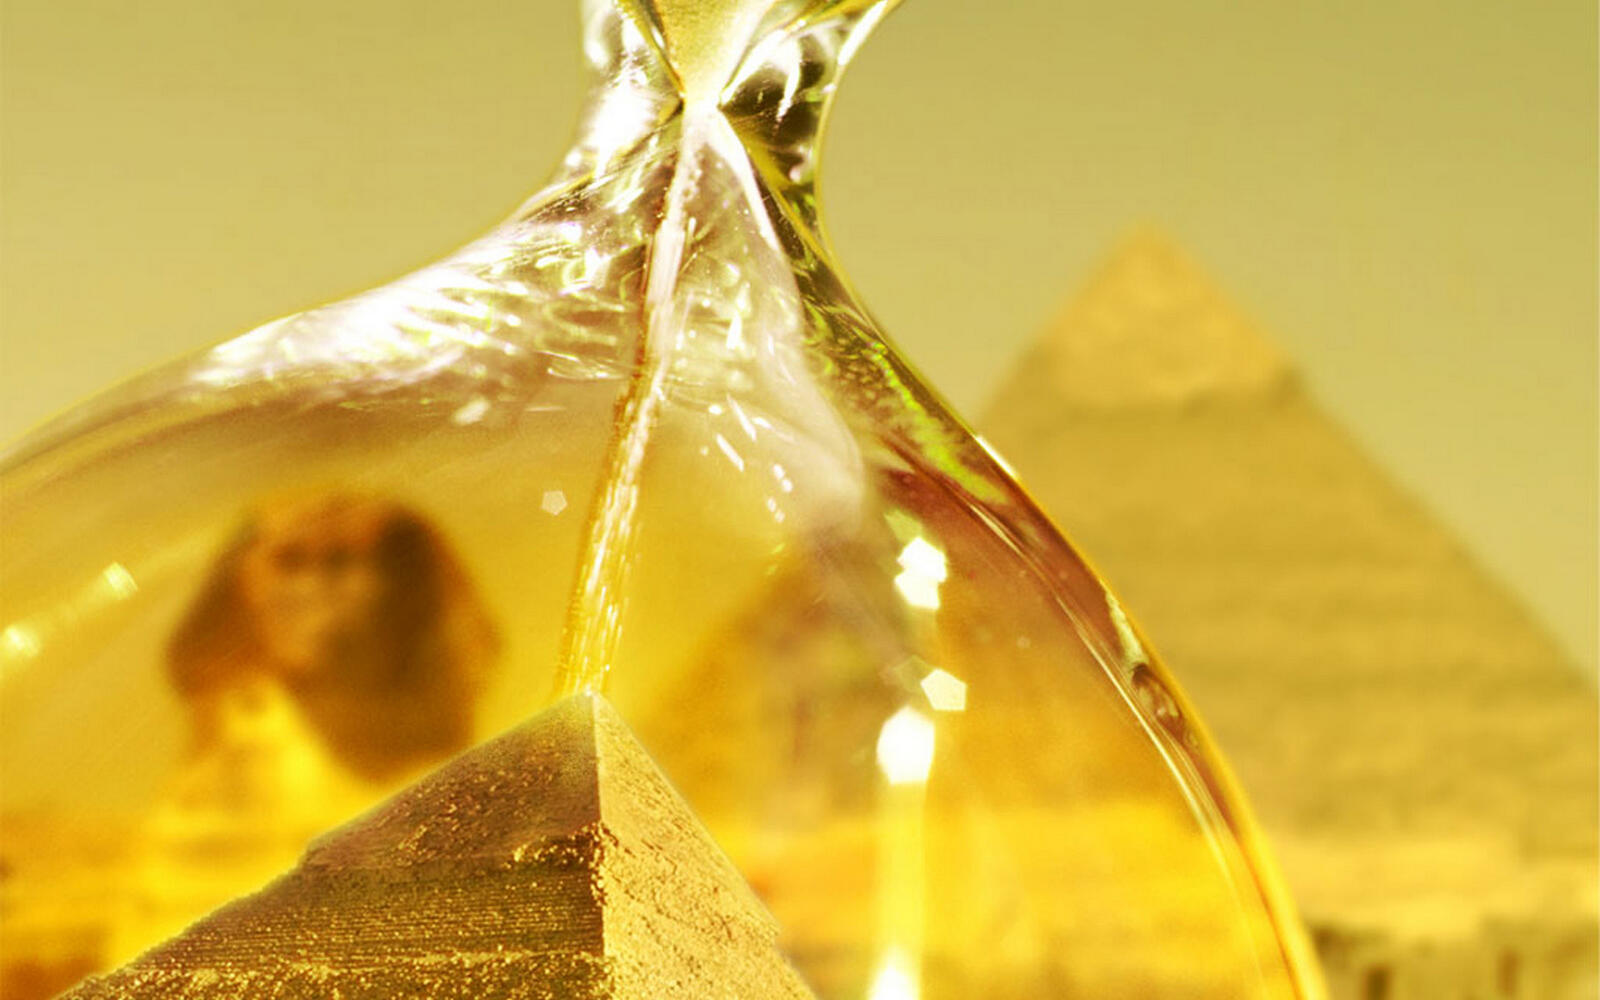 Wallpapers egypt pyramids sphinx on the desktop